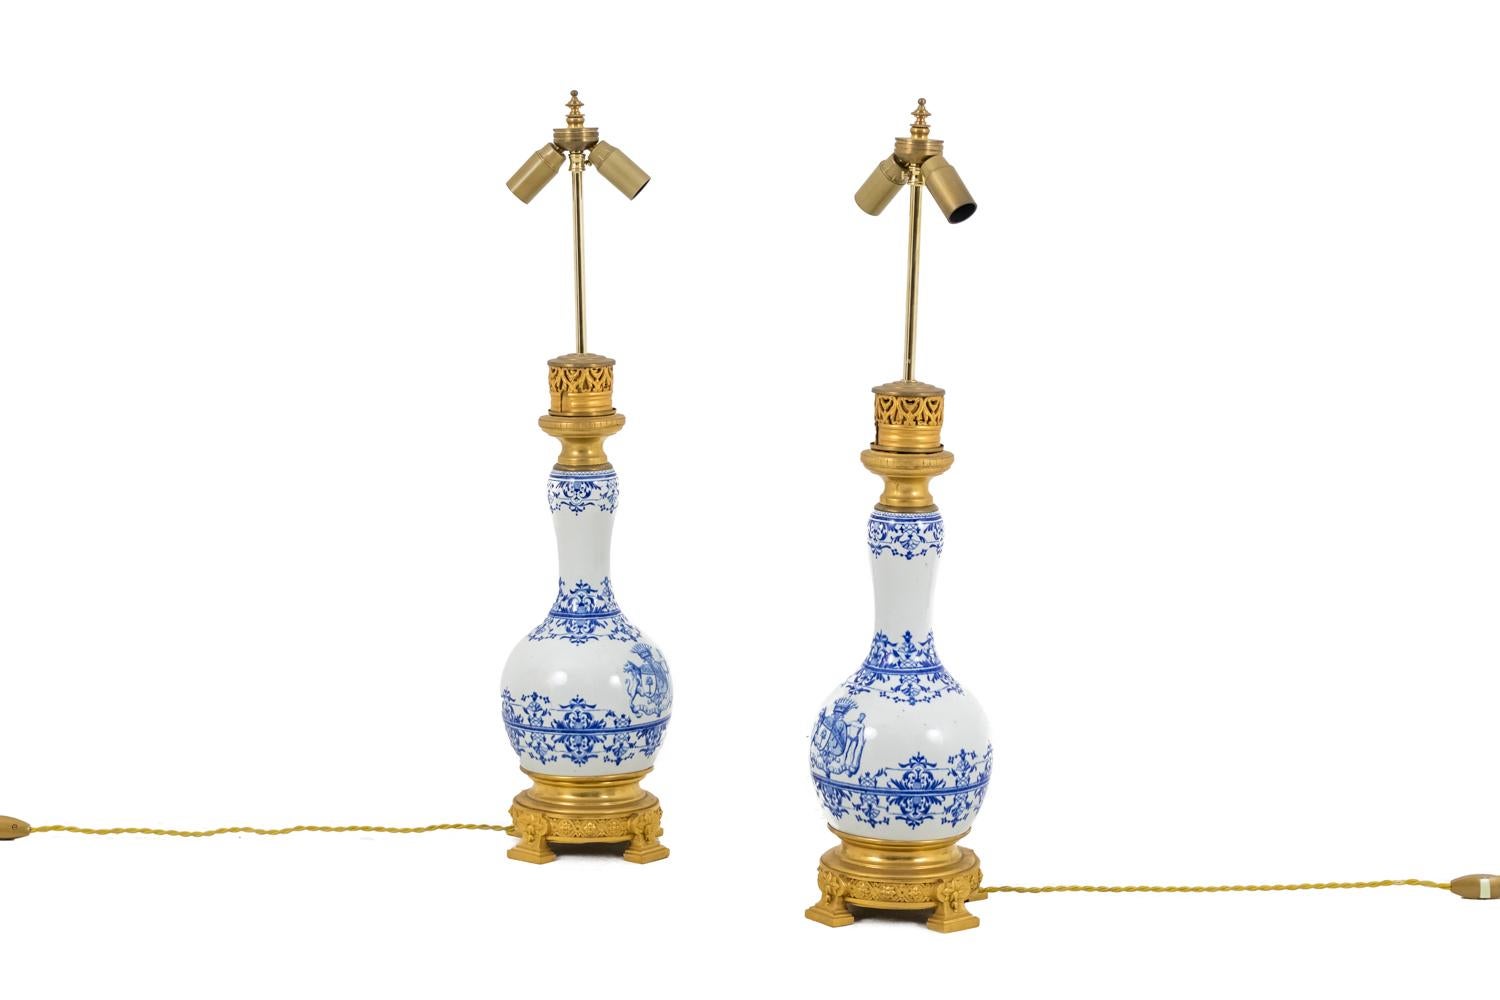 Pair of Gien earthenware lamps mounted in gilt bronze, standing on a circular base with rosettes interlacing.
Blue and white lambrequins and stylized vegetal decoration. Coat of arms with two shields underlined by the ribbon motto « Semper virens »